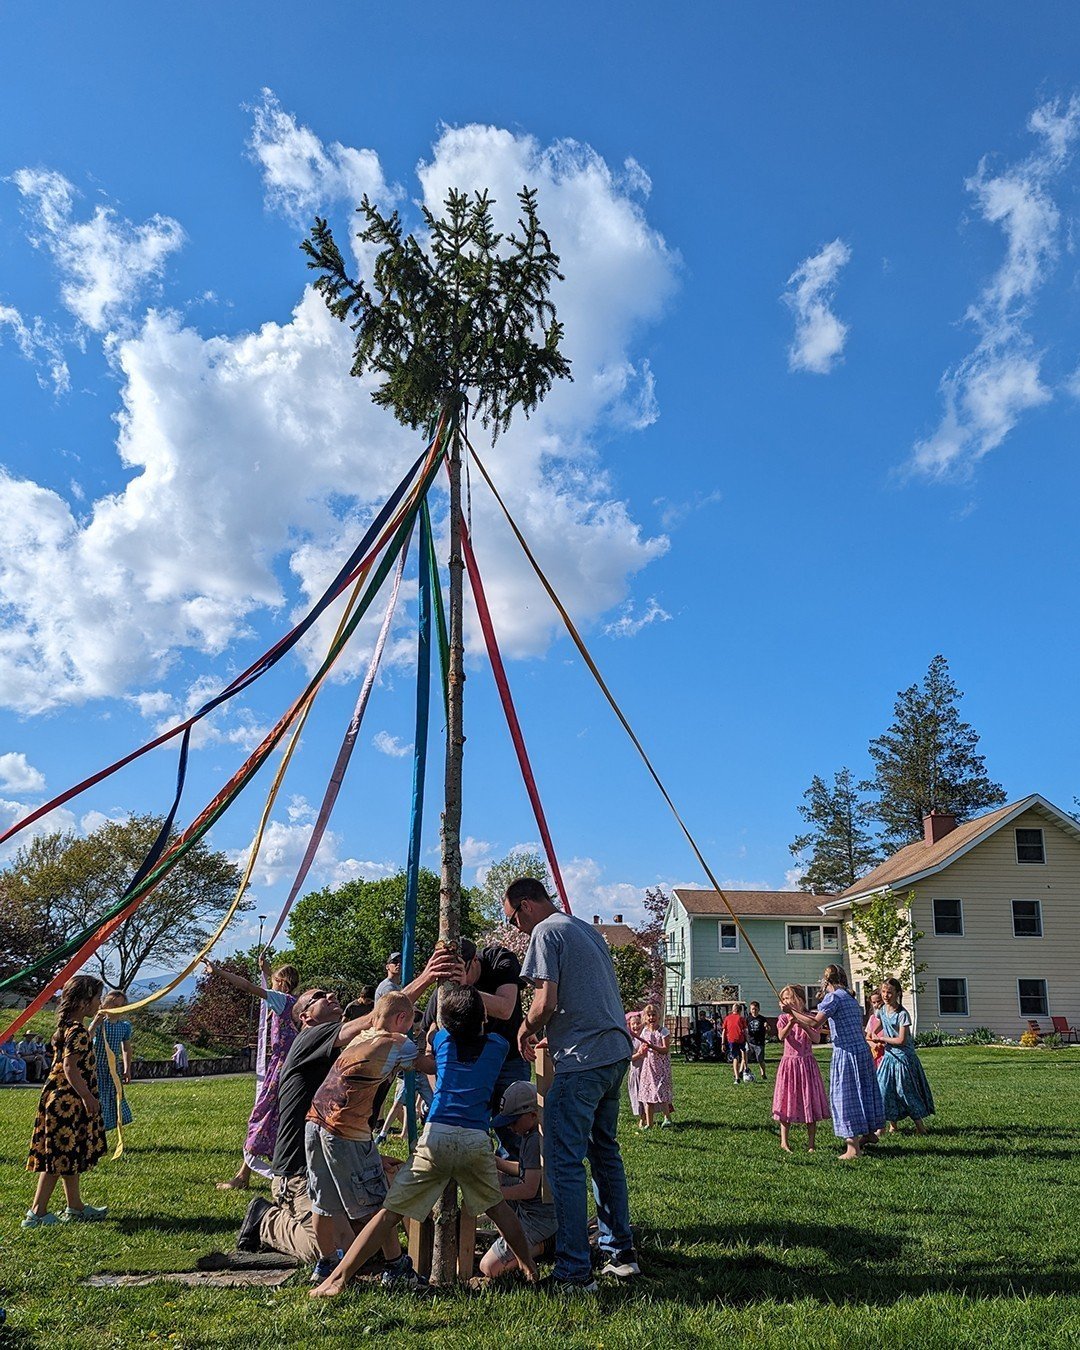 It wasn't the biggest Maypole this year but it was the perfect size for the first and second grade children to put up with their dads and dance around. Everyone at Woodcrest got together to observe the occasion and celebrate the incredible weather!